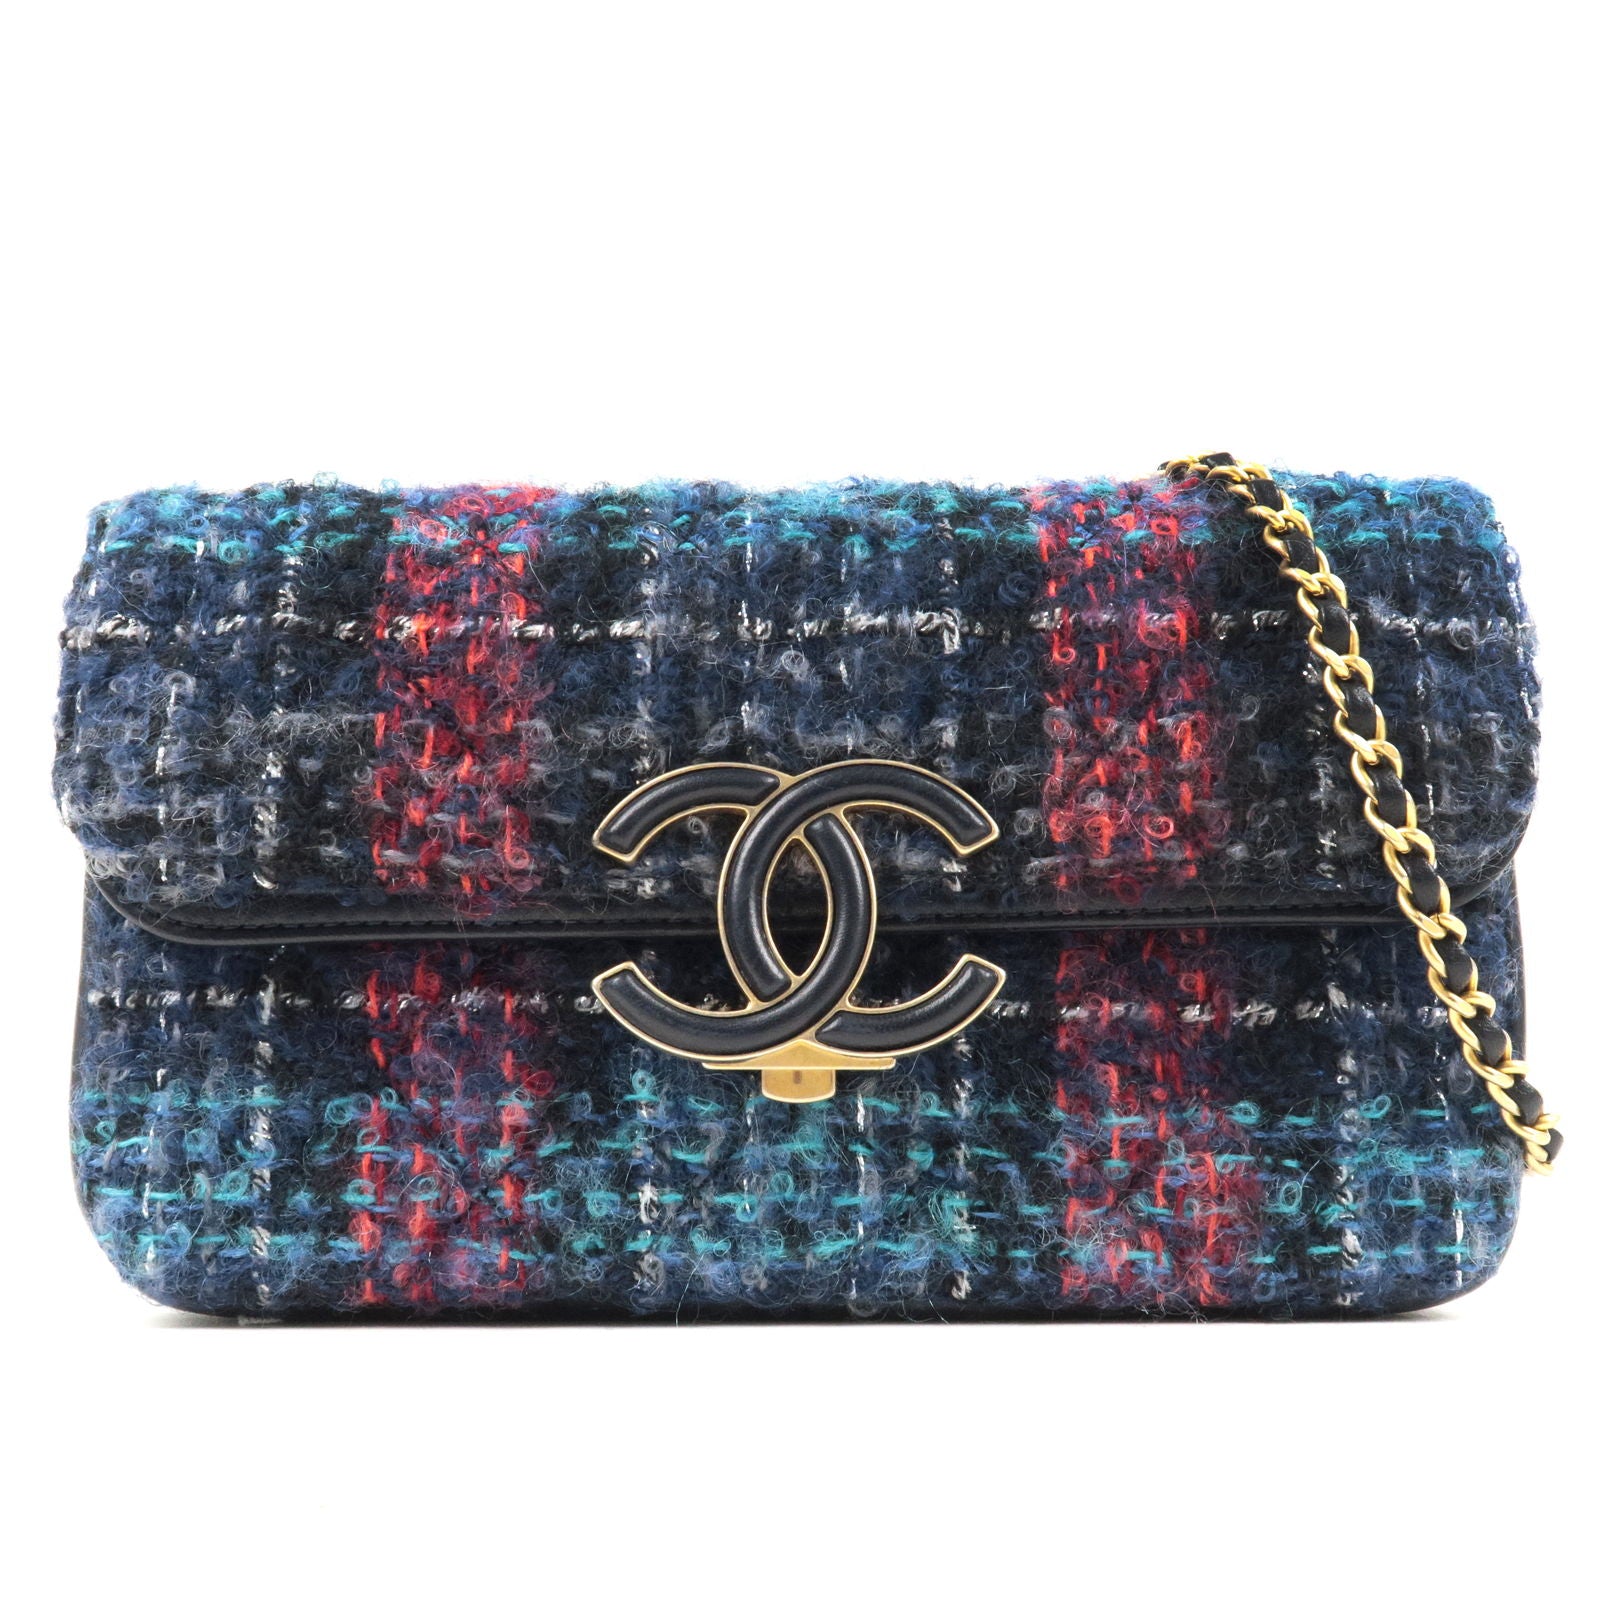 Flap - Tweed - Navy – dct - Shoulder - Chain - Chanel Vintage handbag in  beige leather - Double - ep_vintage luxury Store - CHANEL - Bag - Leather